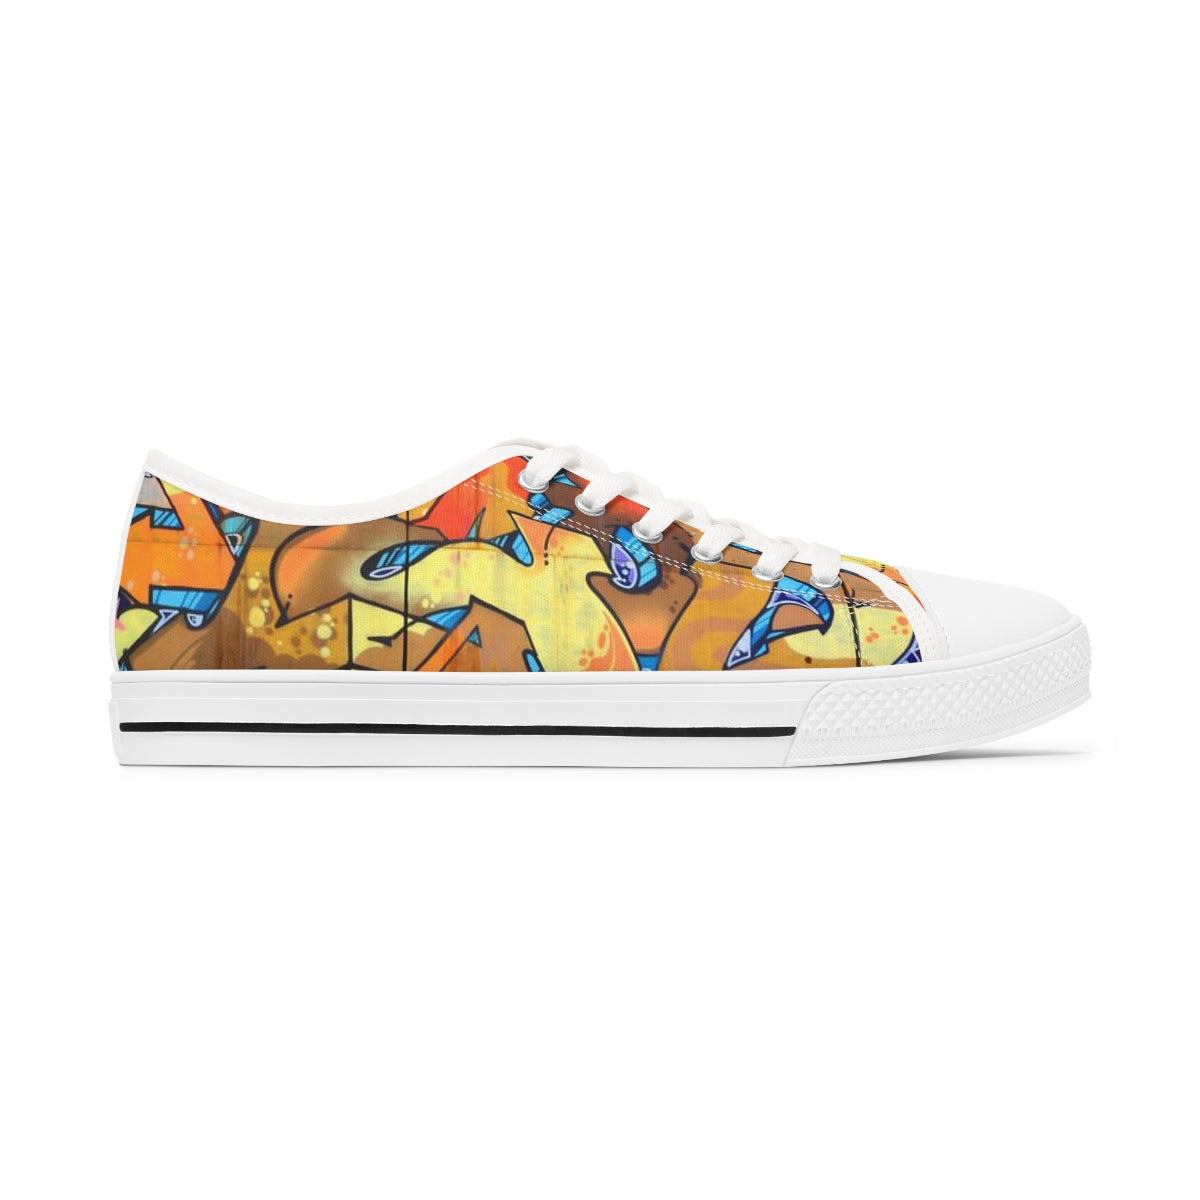 Main and Fifth – Women's Low Top Sneakers